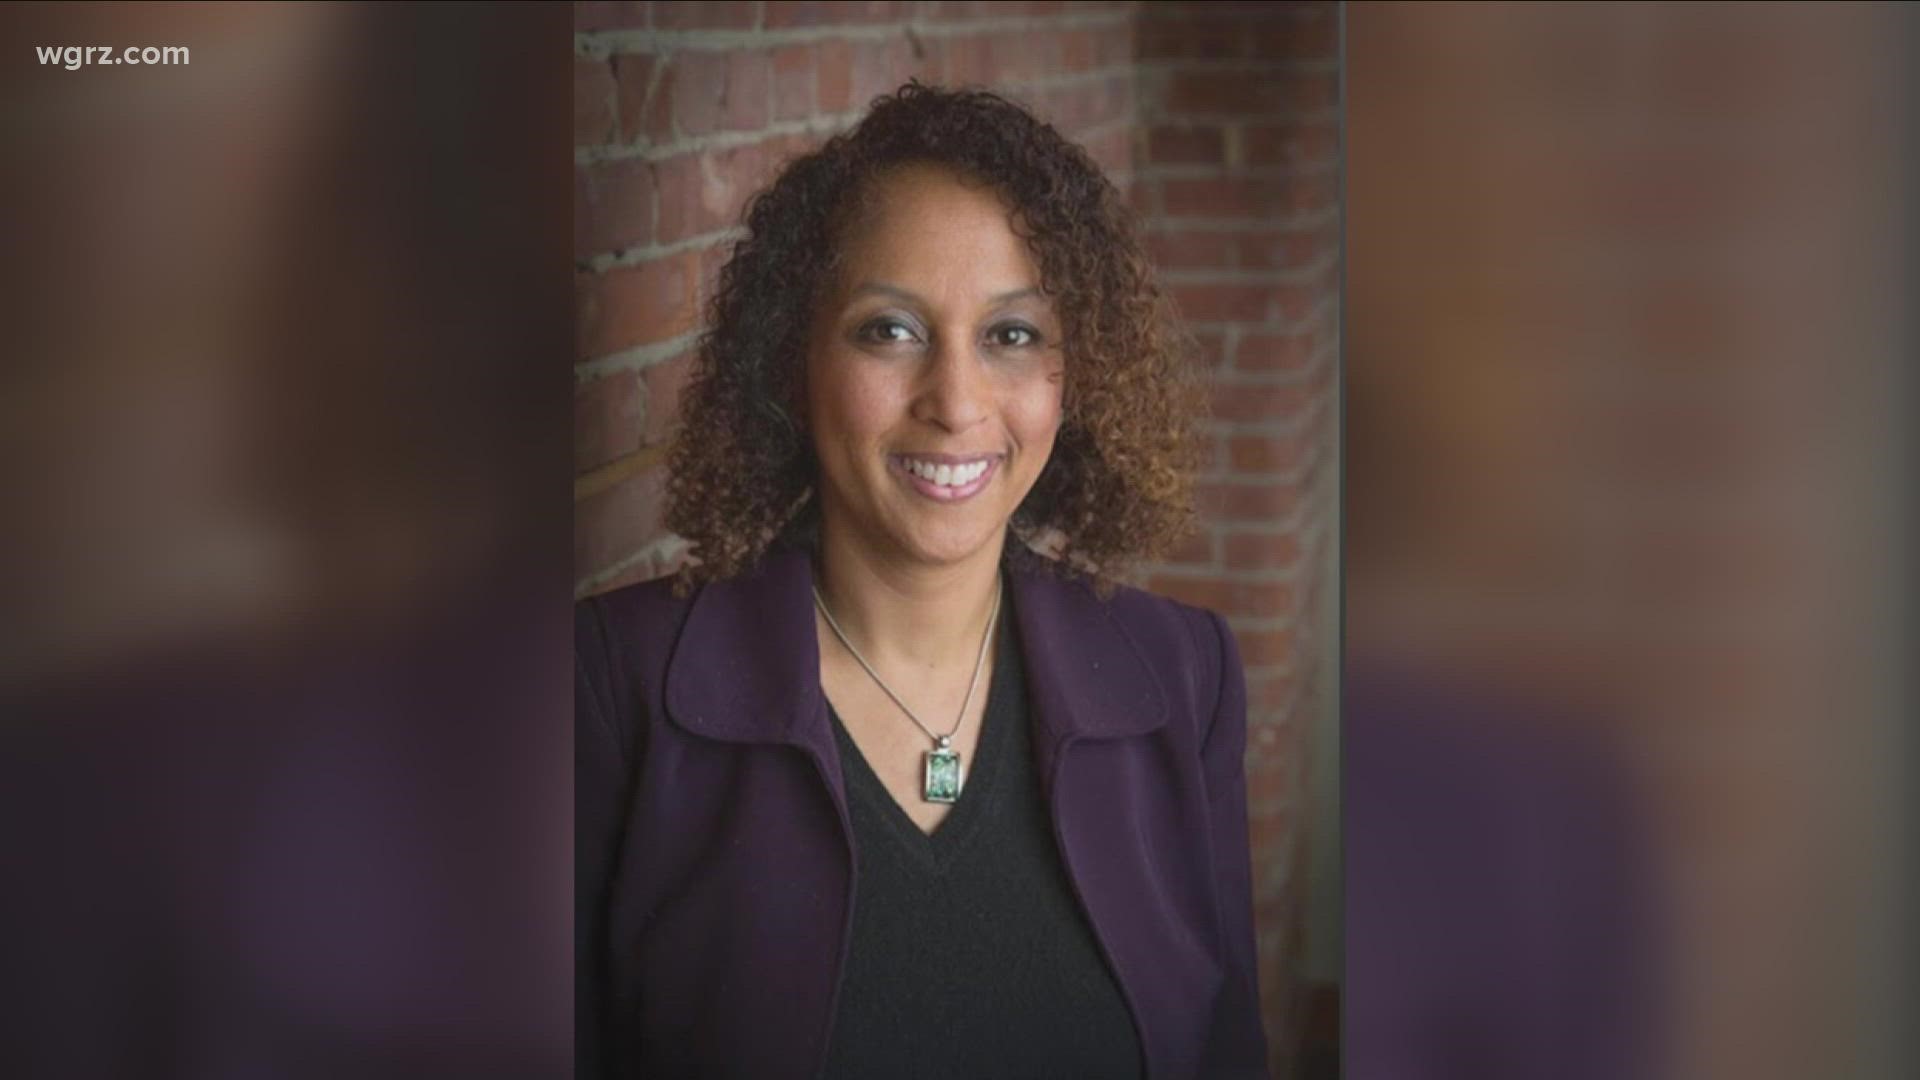 Trini Ross to become U.S. Attorney for western district of New York